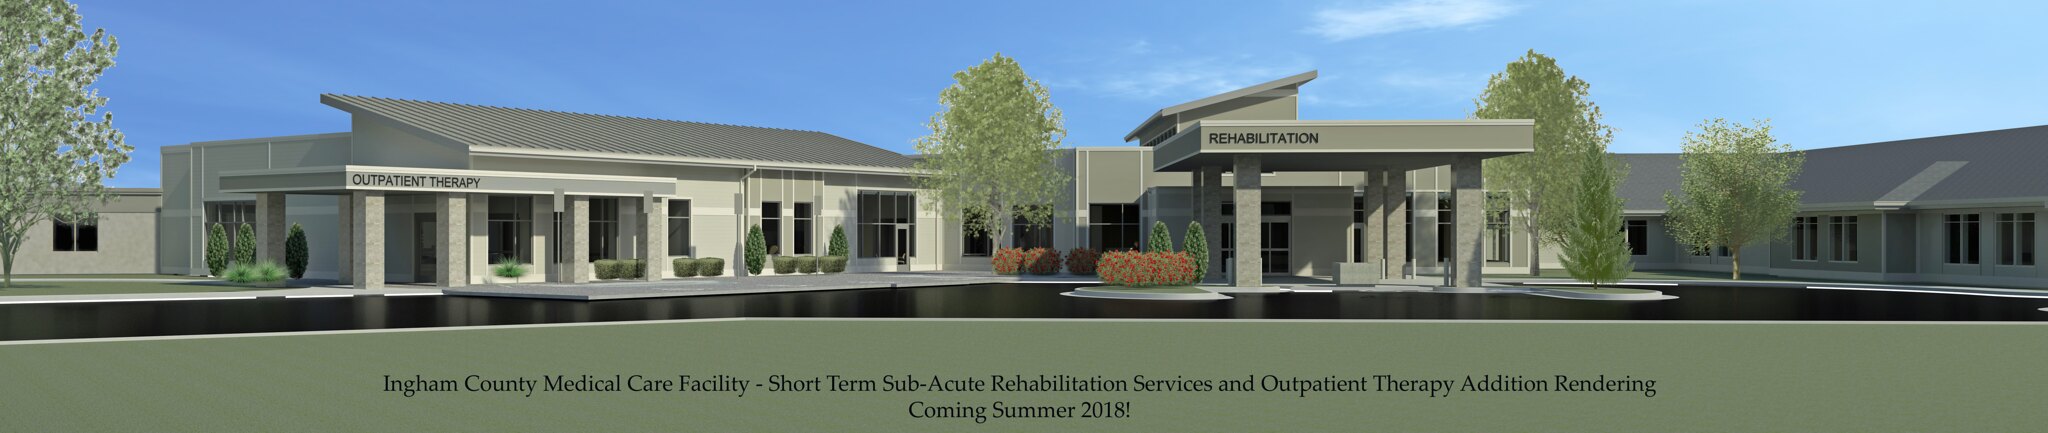 New Expansion Coming to Ingham County Medical Care Facility